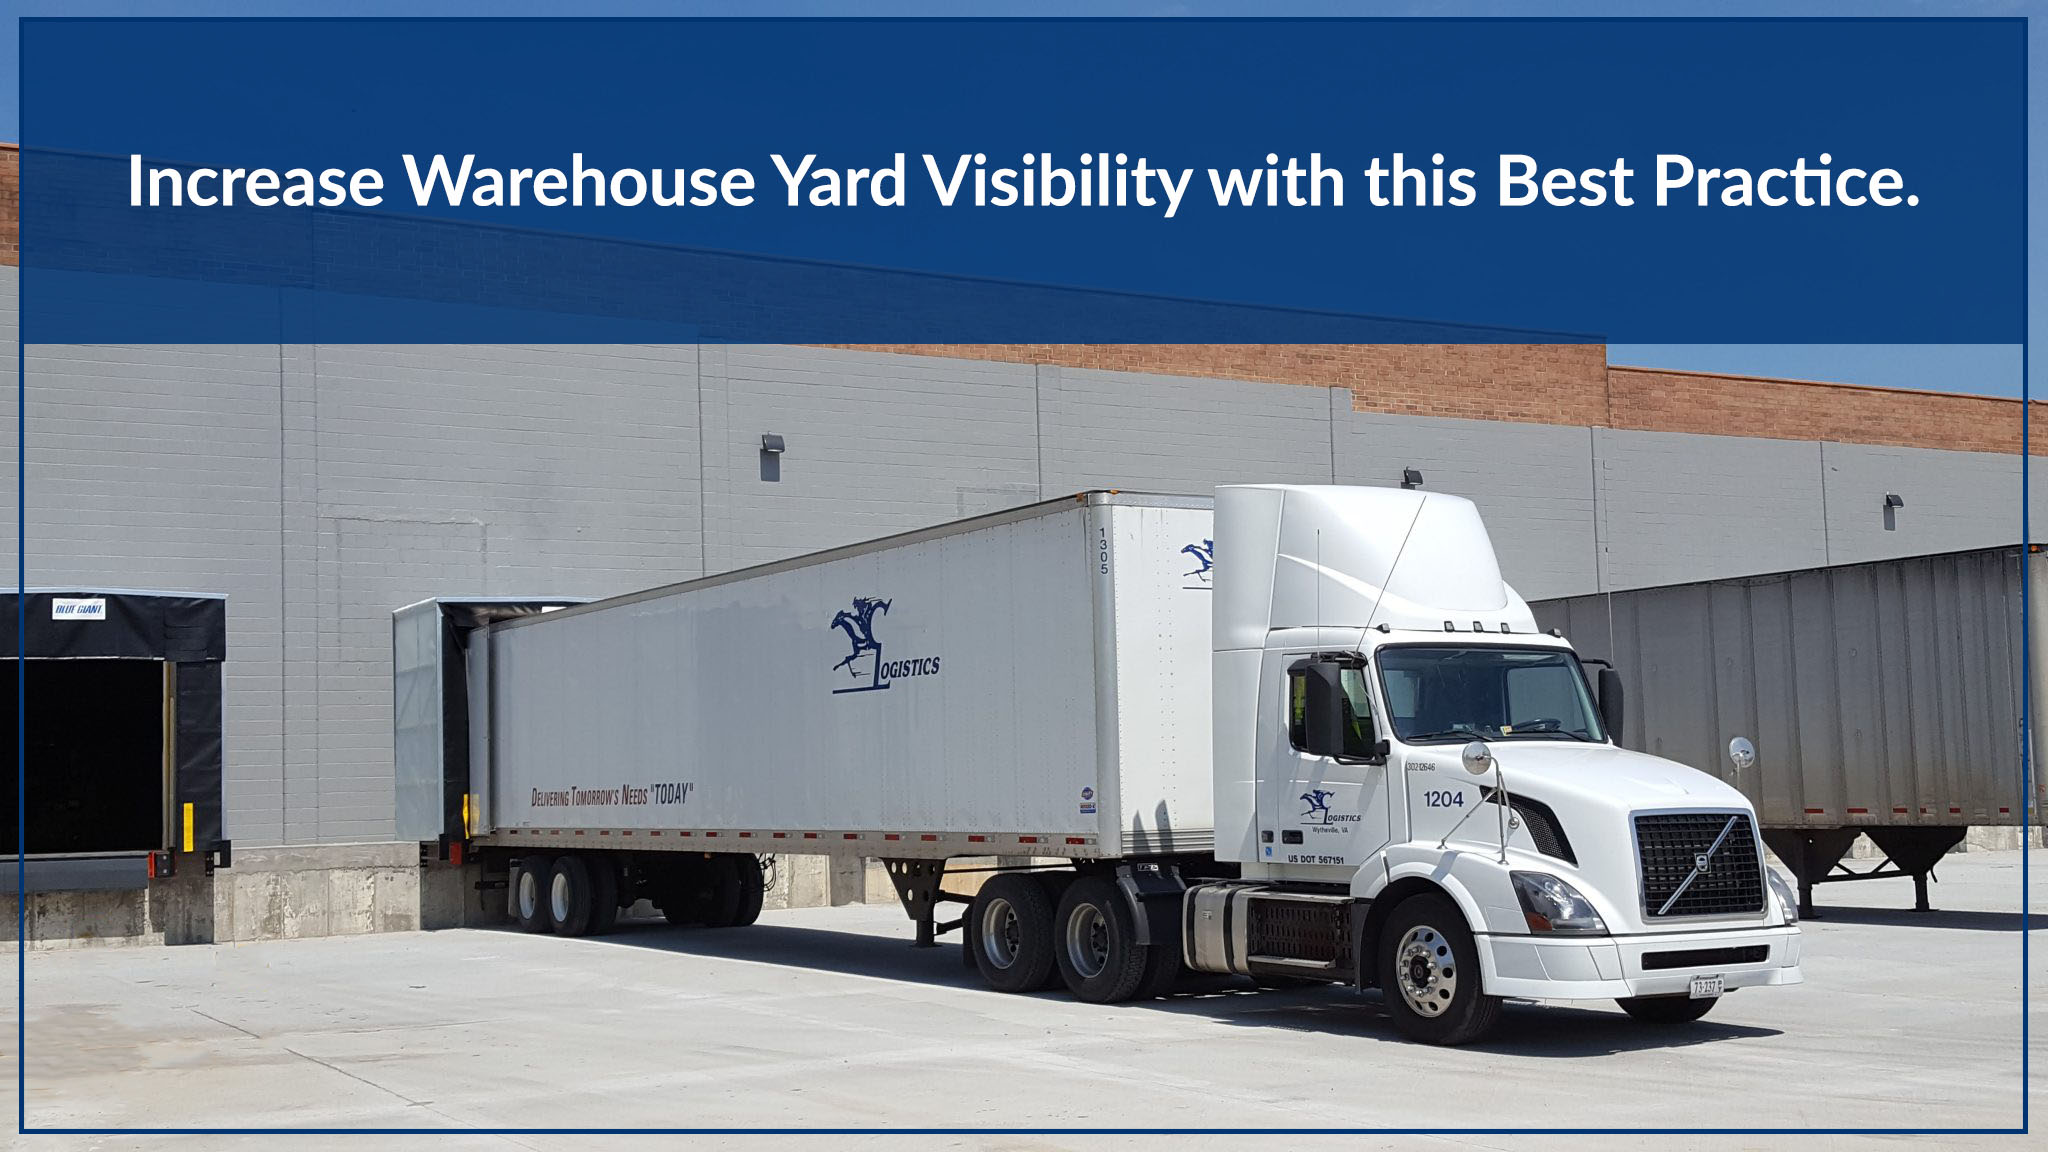 The Warehouse Yard Management Best Practice to Increase Visibility ...